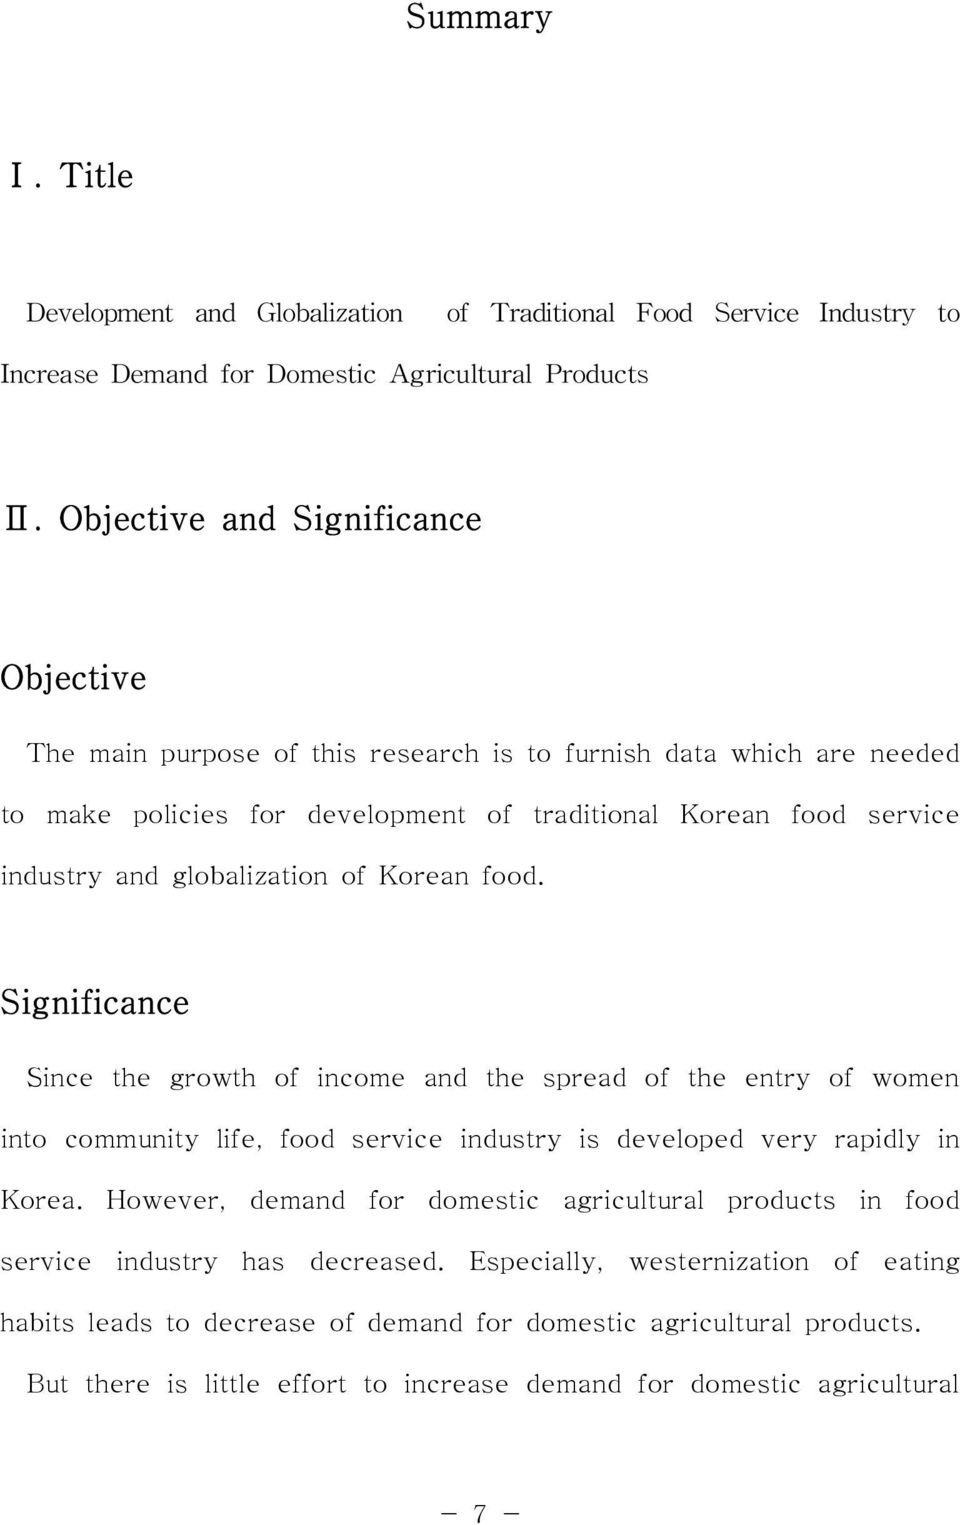 Since the growth of income and the spread of the entry of women into community life, food service industry is developed very rapidly in Korea.